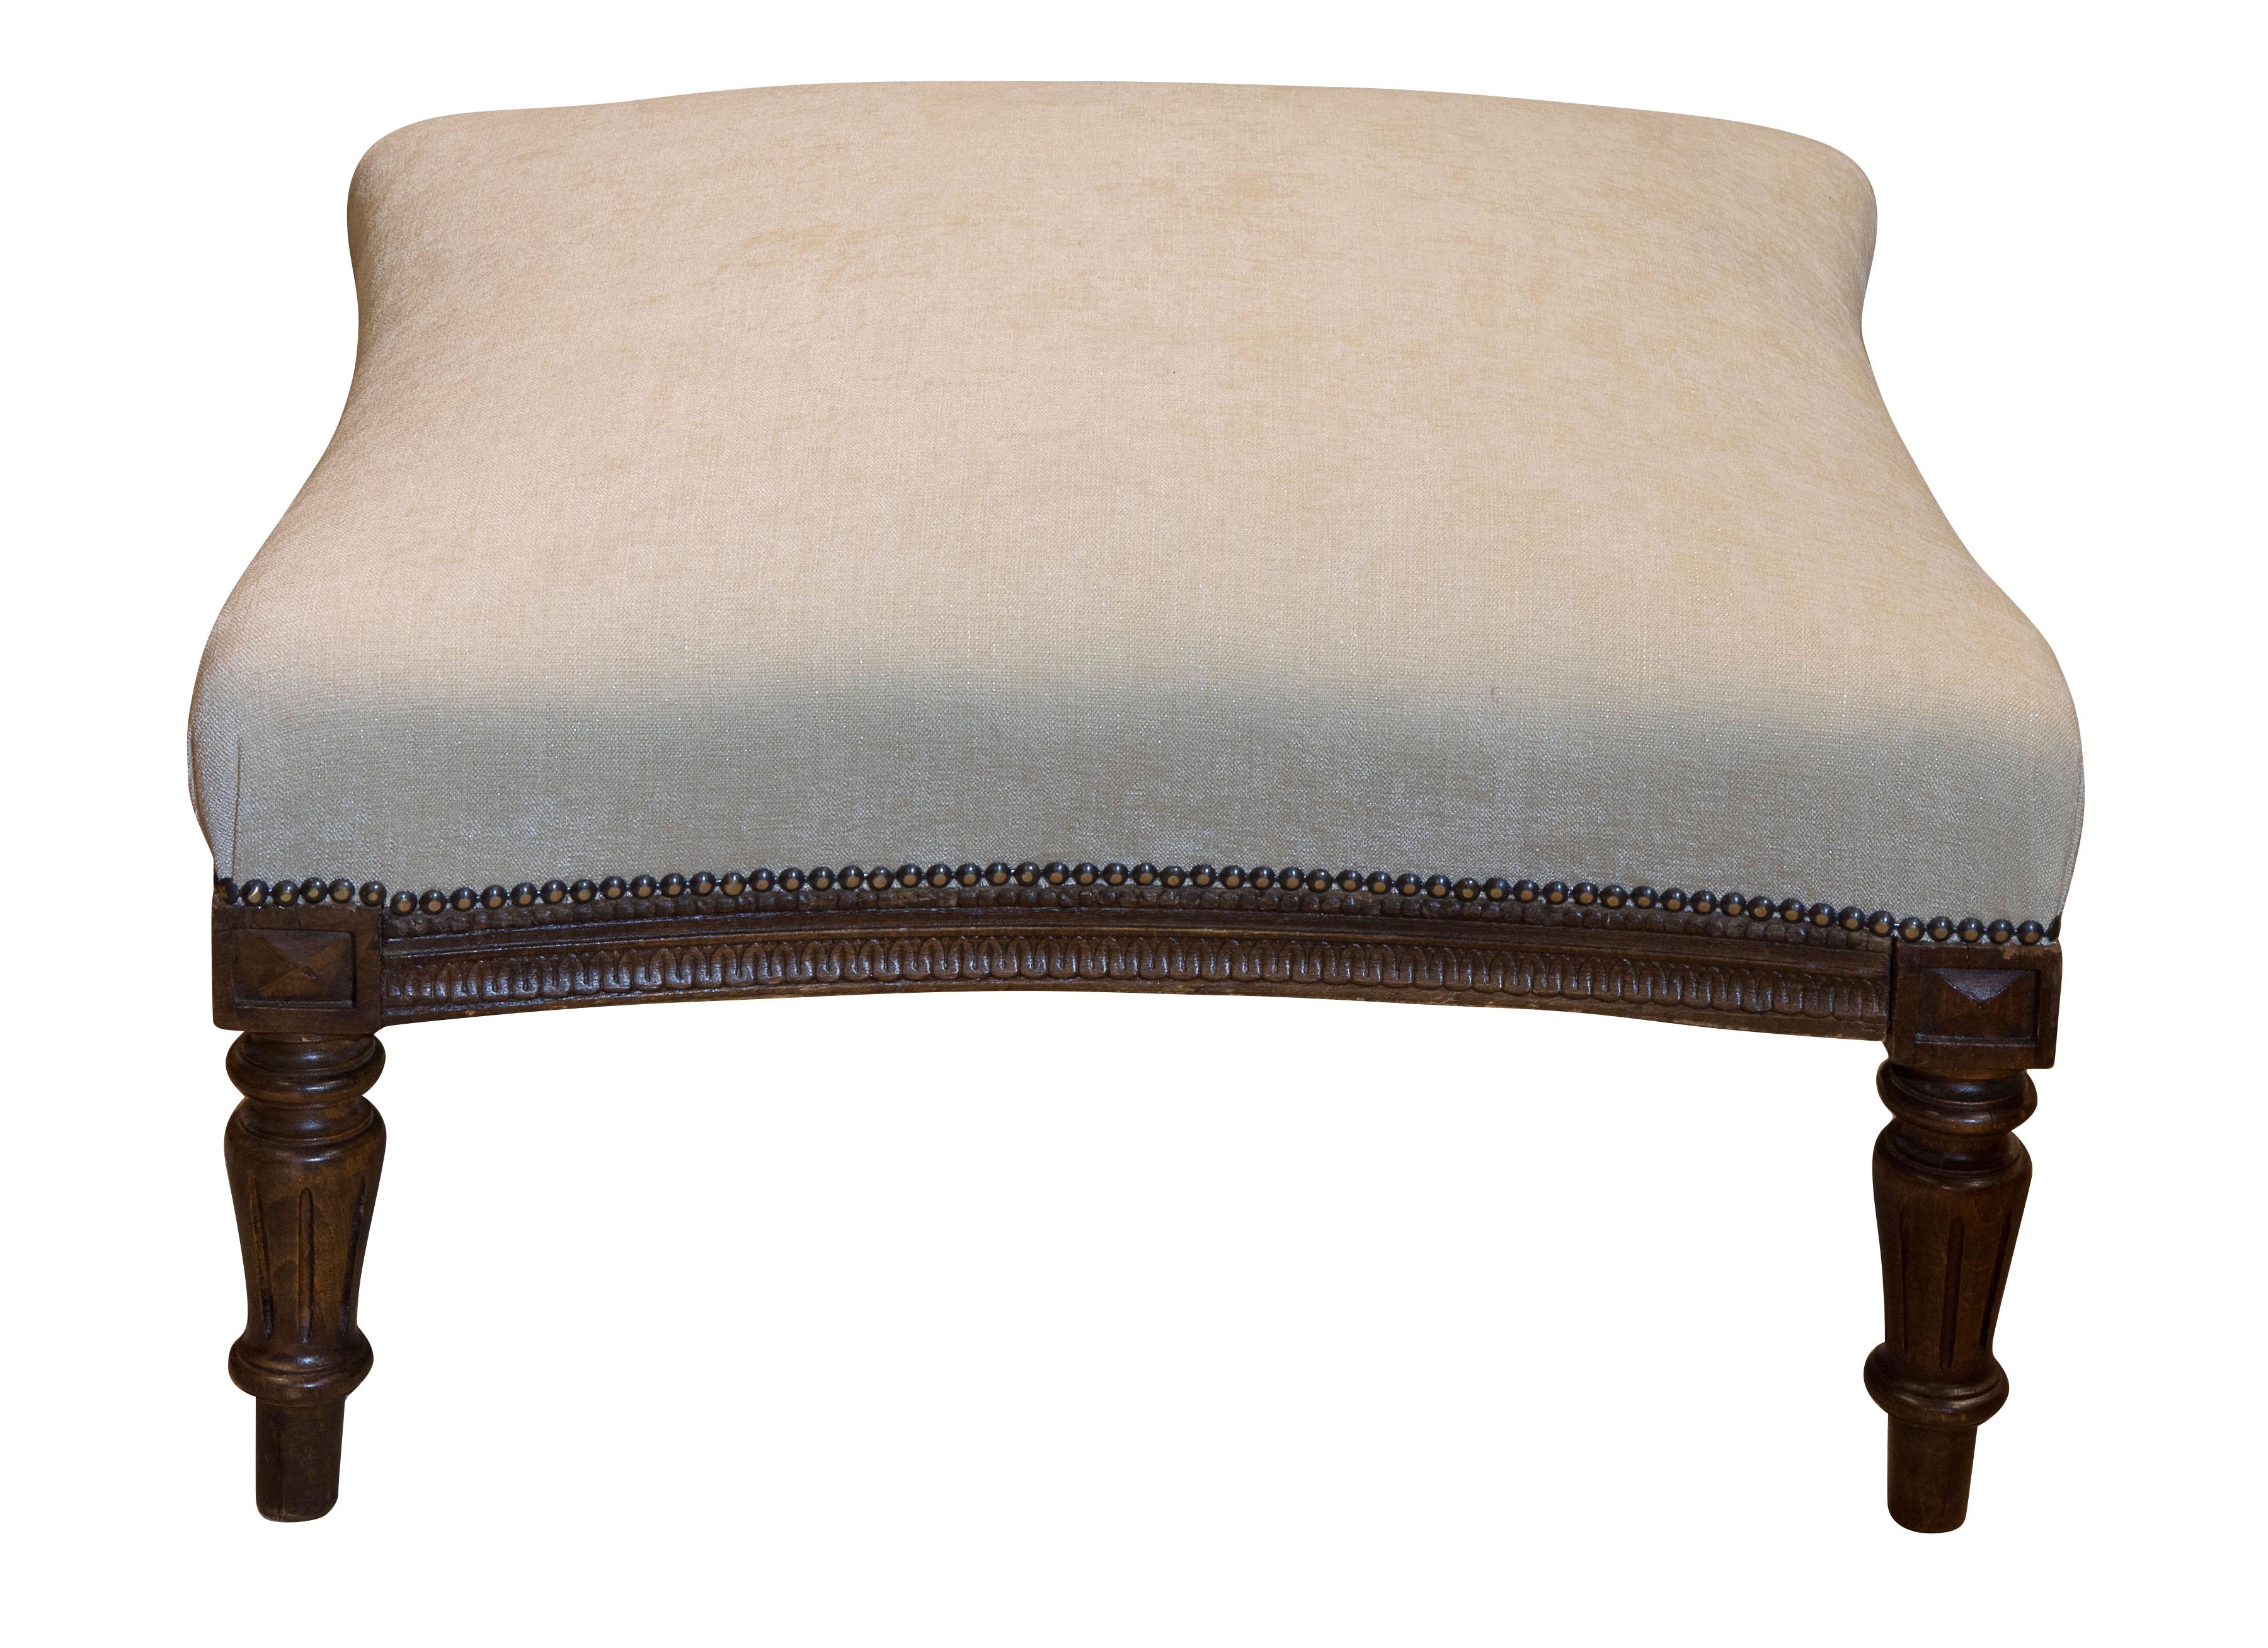 Intricately carved late 19th century large French footstool or ottoman. (newly upholstered).